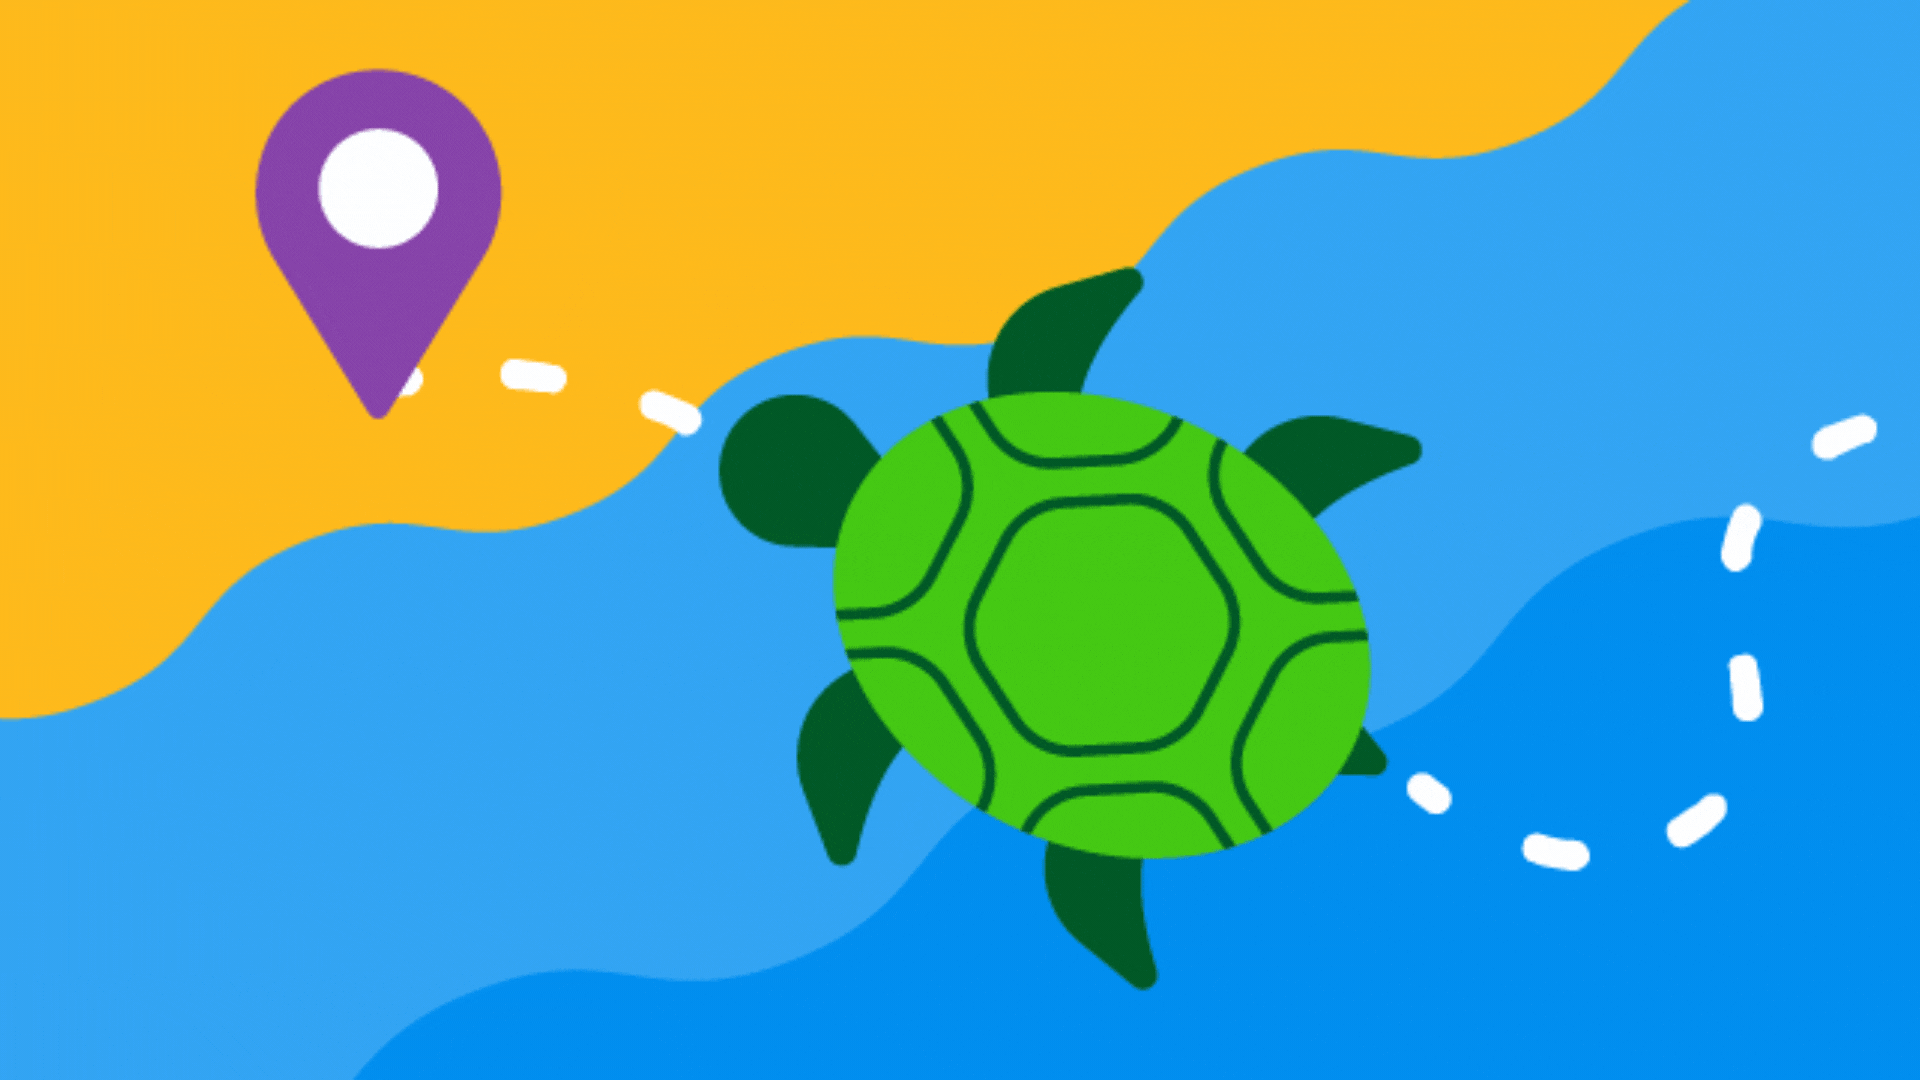 Turtle tracker project using Scratch. Input data to show turtle movement in real life.